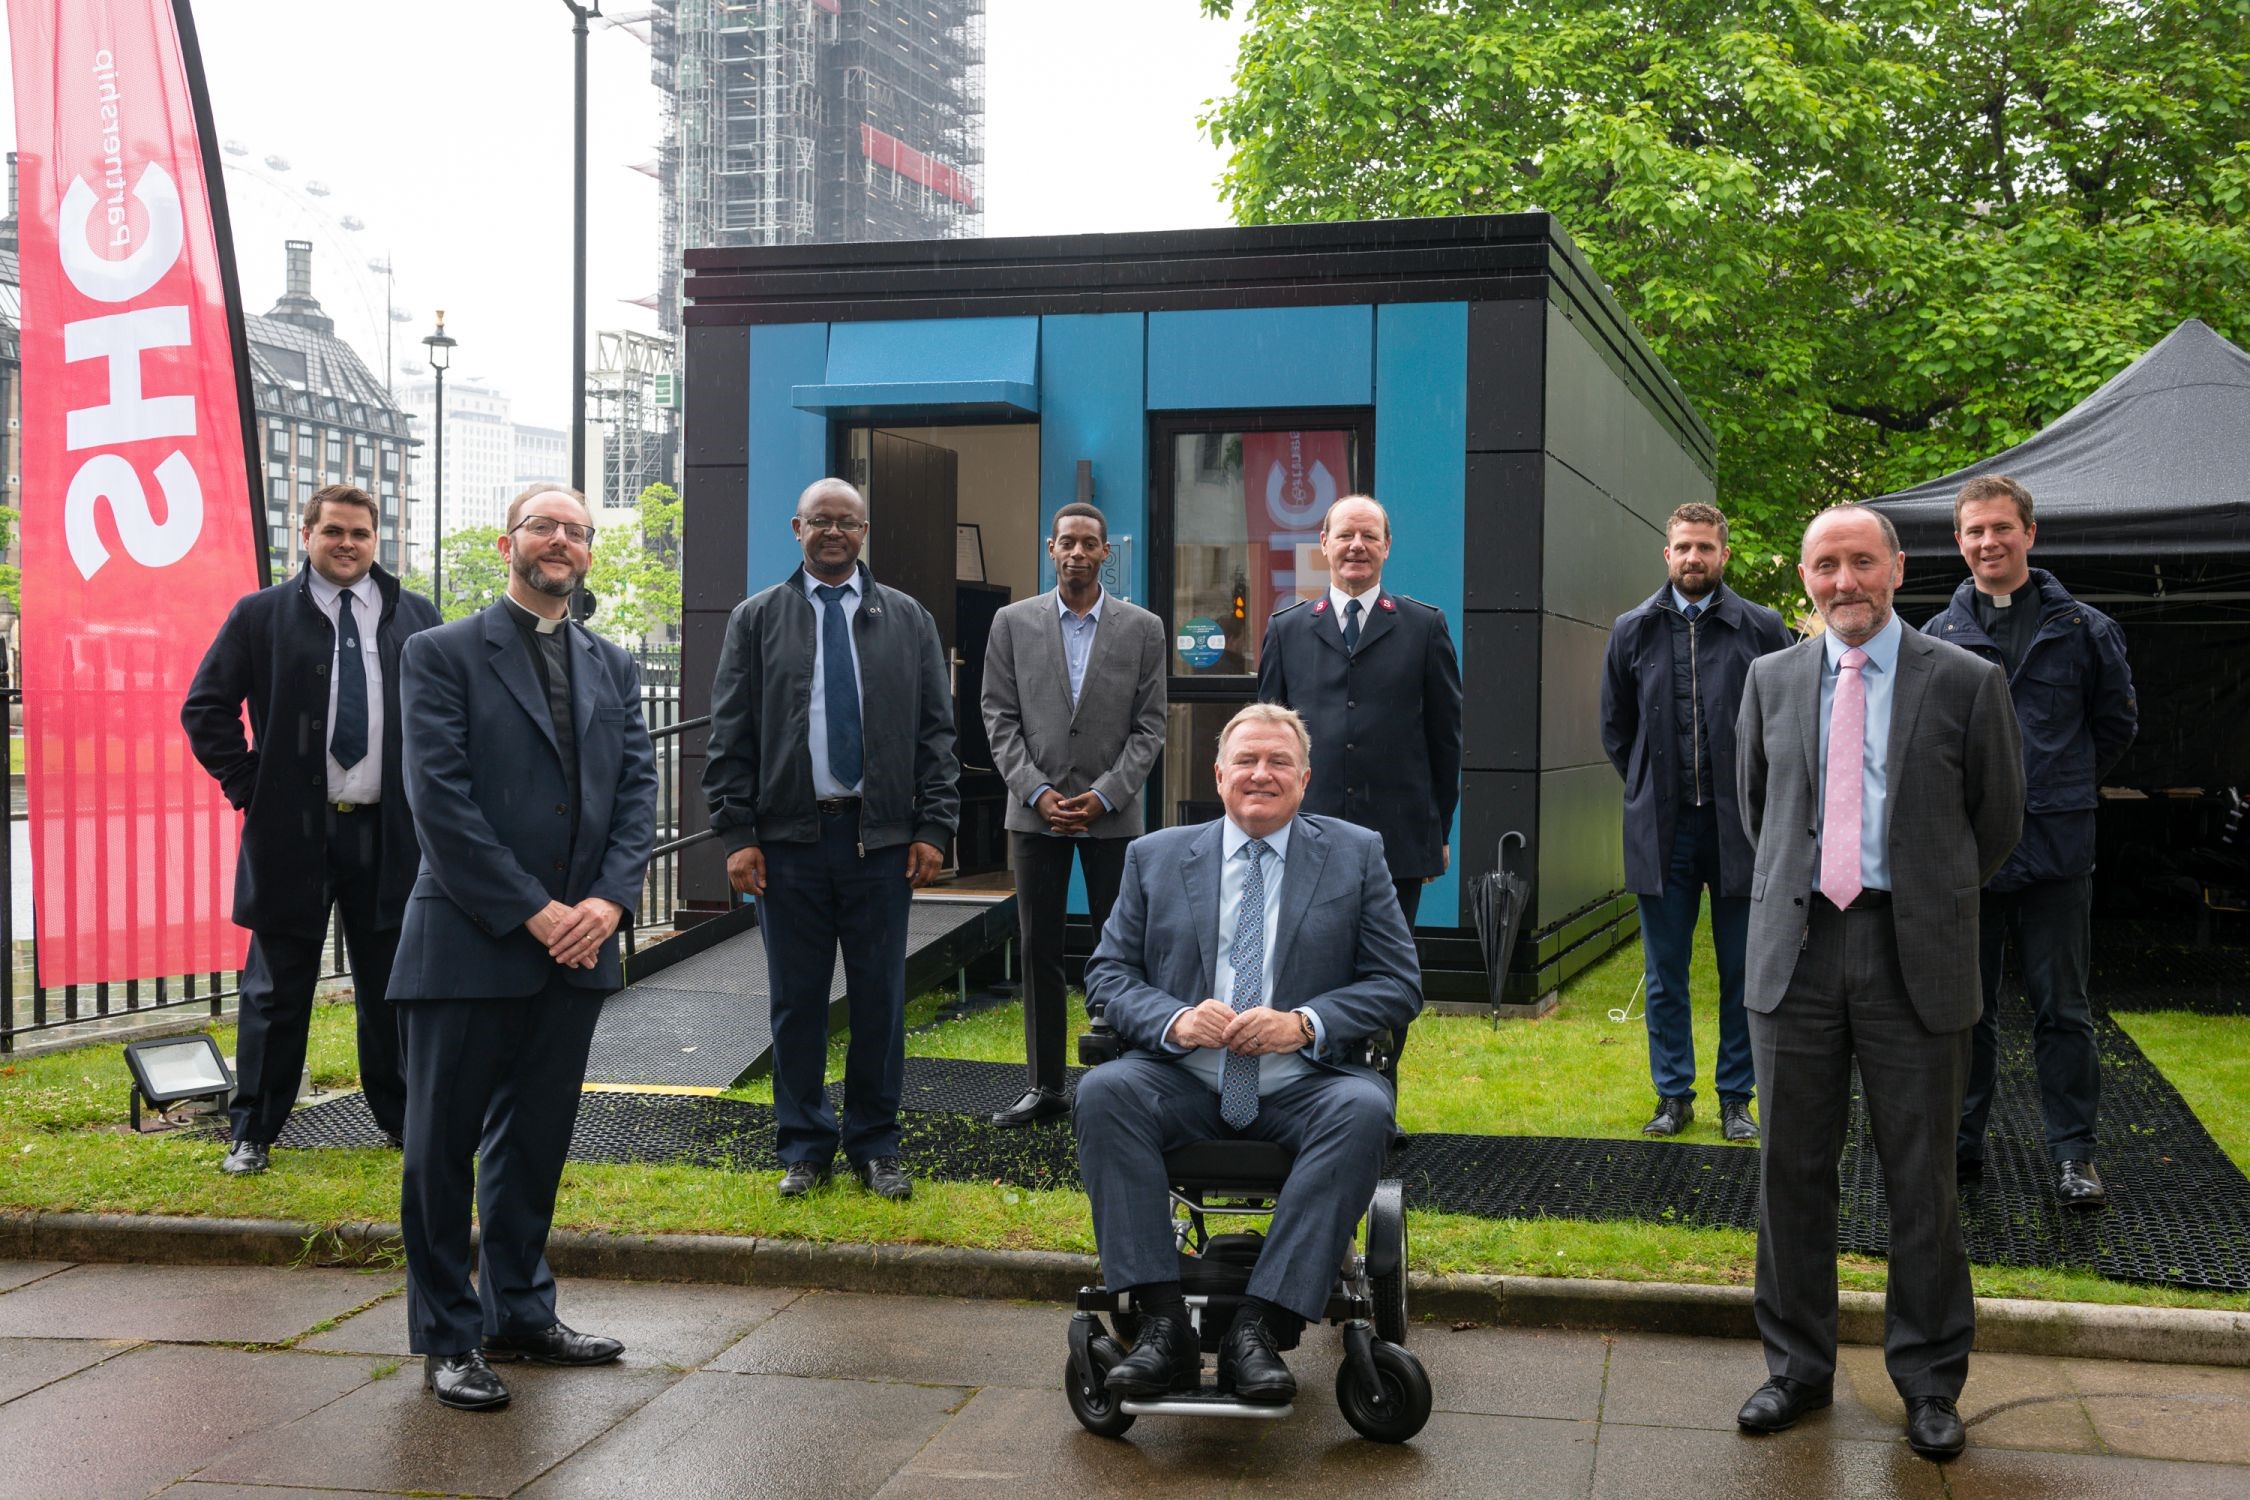 New partnership launches to tackle homelessness with call for Government support @Hill_Group_UK @CitizensUK @salvationarmyuk